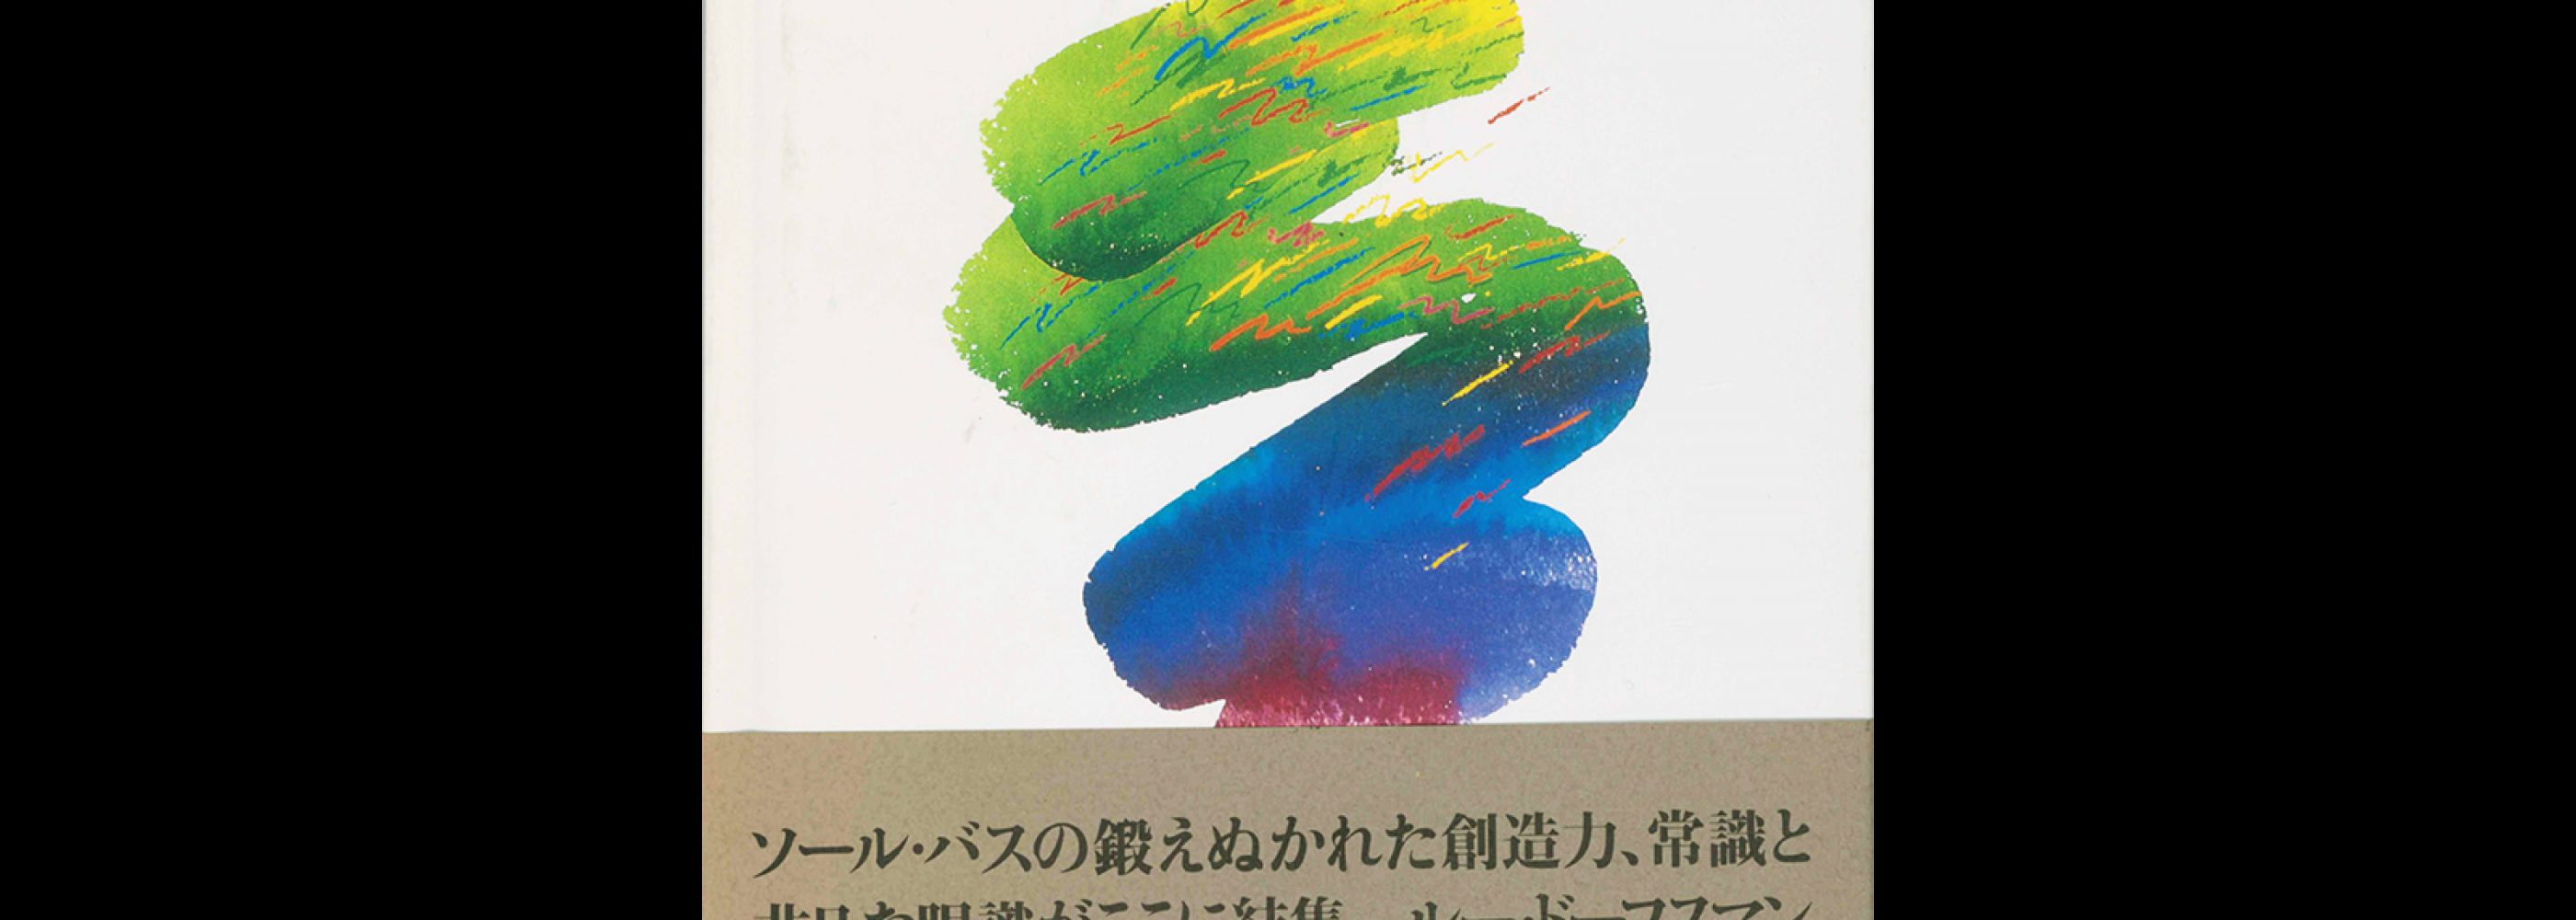 Ginza Graphic Gallery 10, Saul Bass